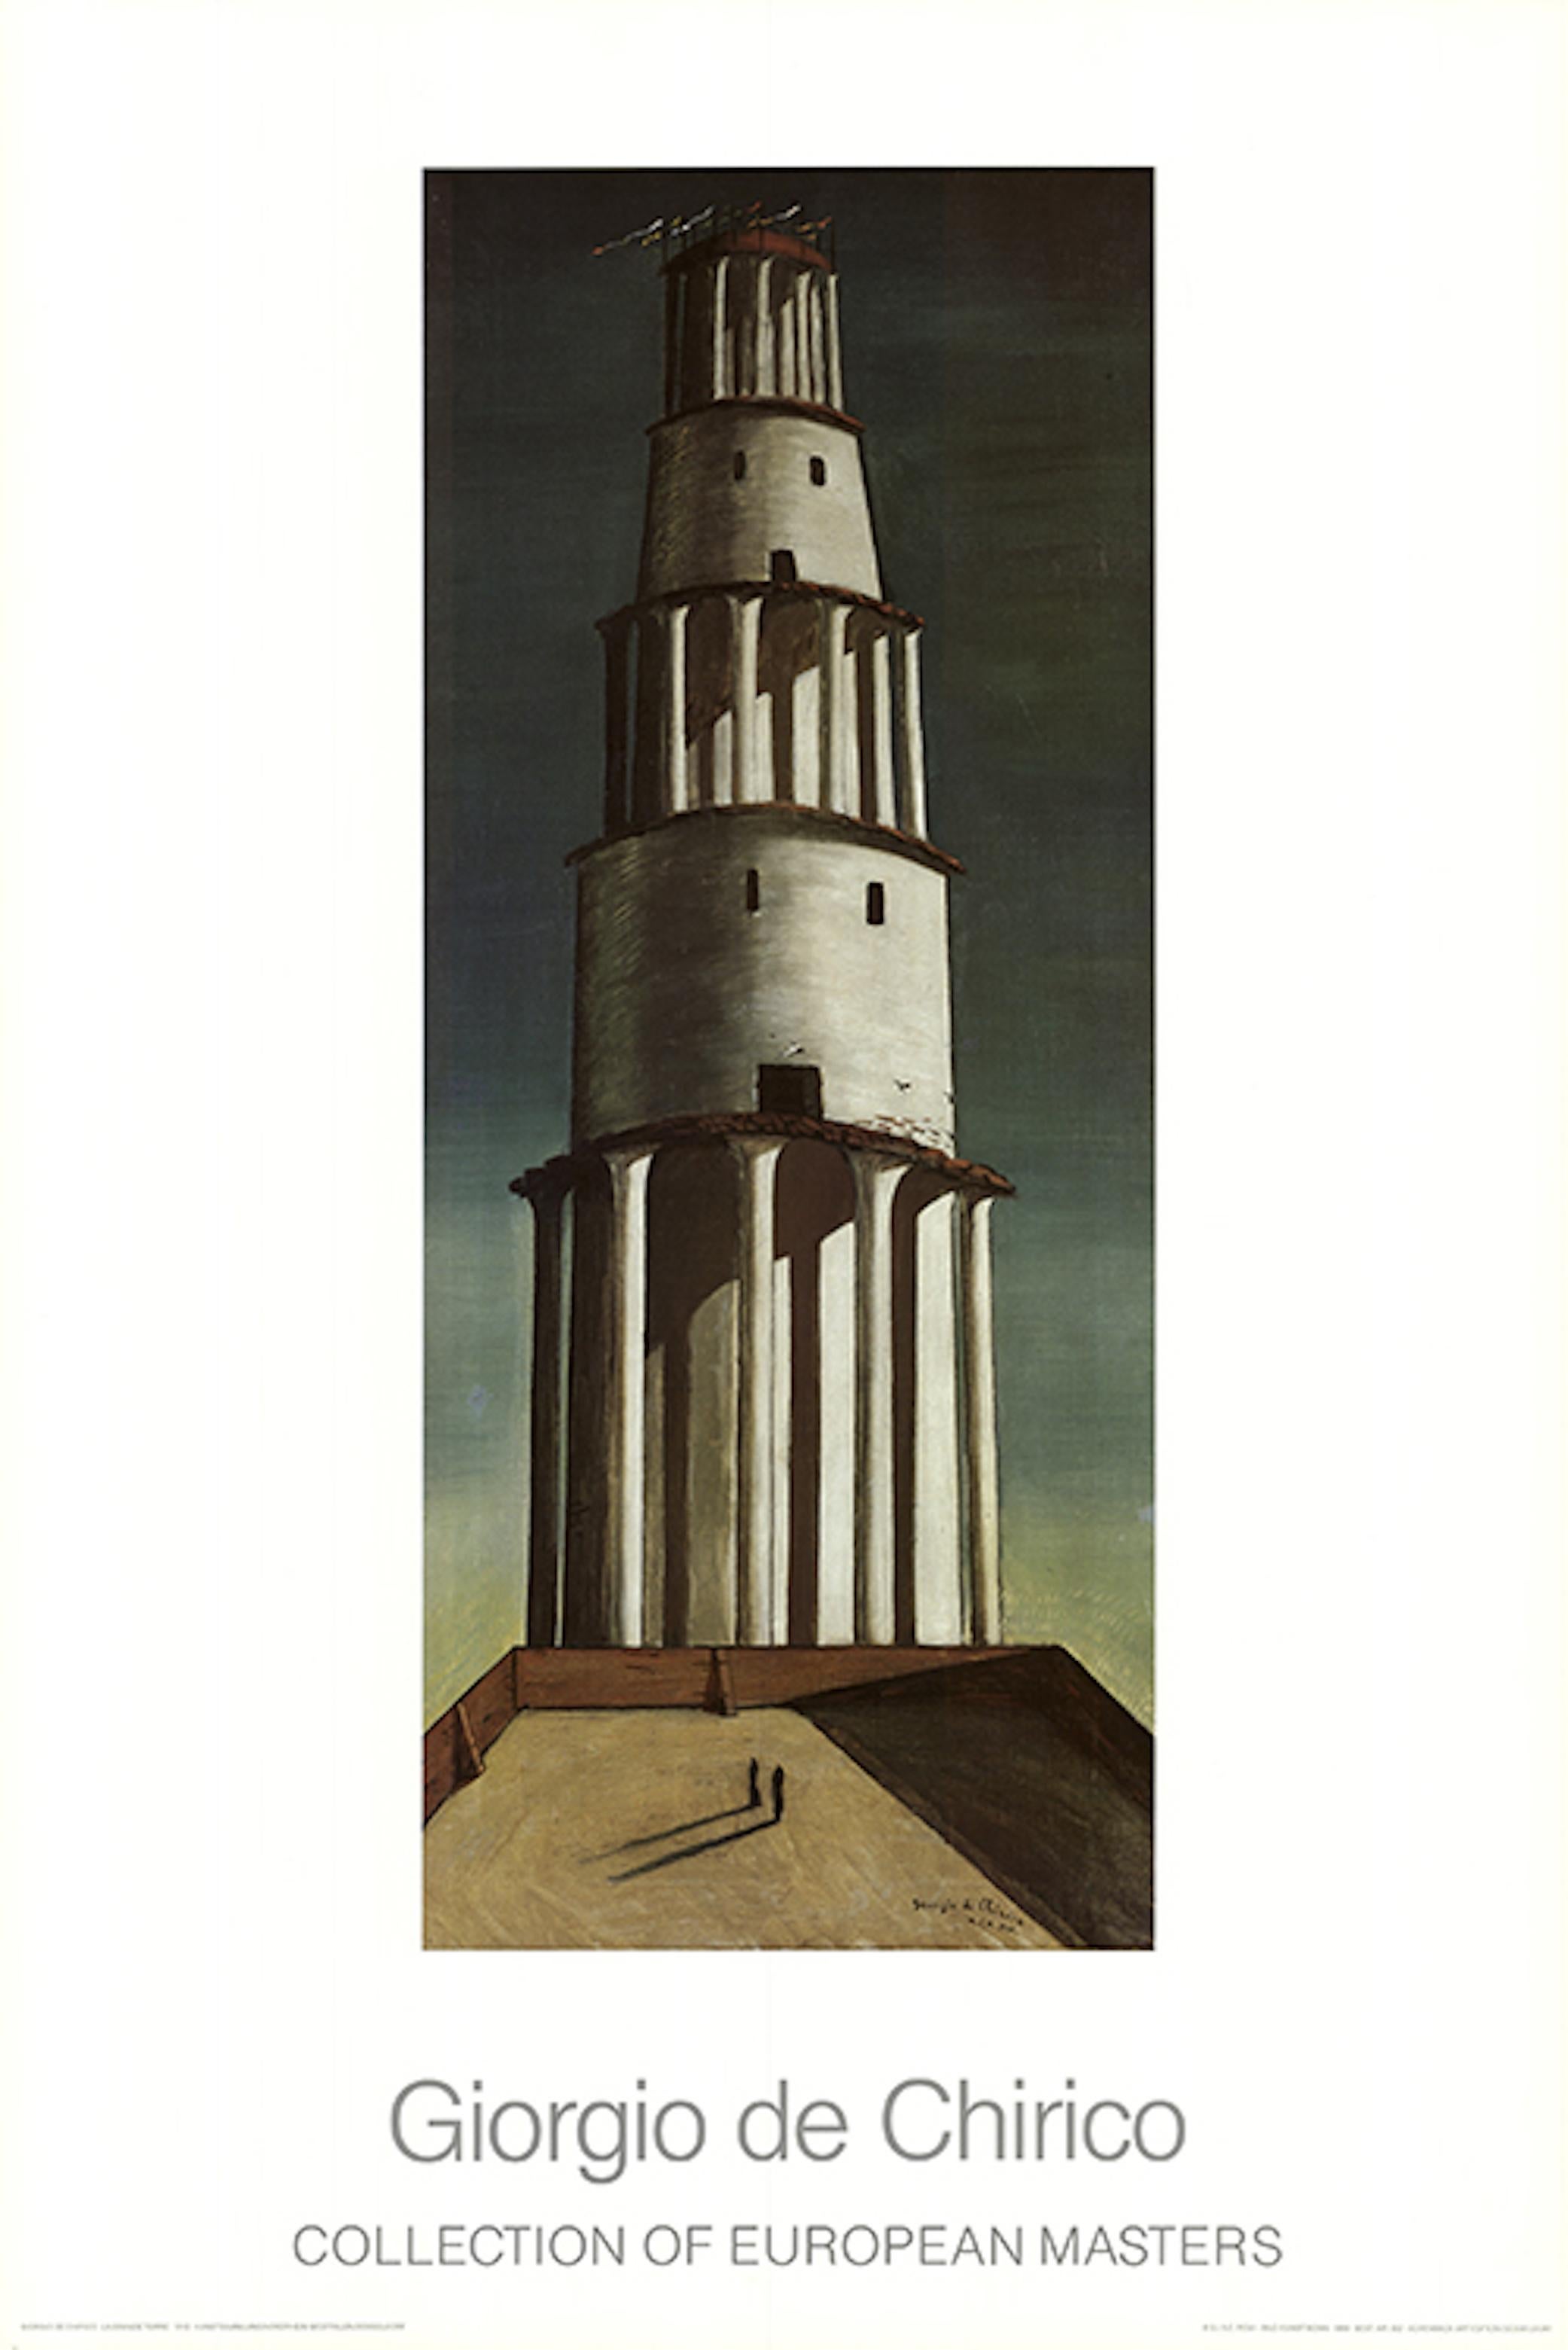 Surreal high tower reminiscent of ancient Roman arcades with a play of shadows and illogical perspective.

Art print after the original from 1913
Signed and dated in print
In good condition, minimal signs of storage